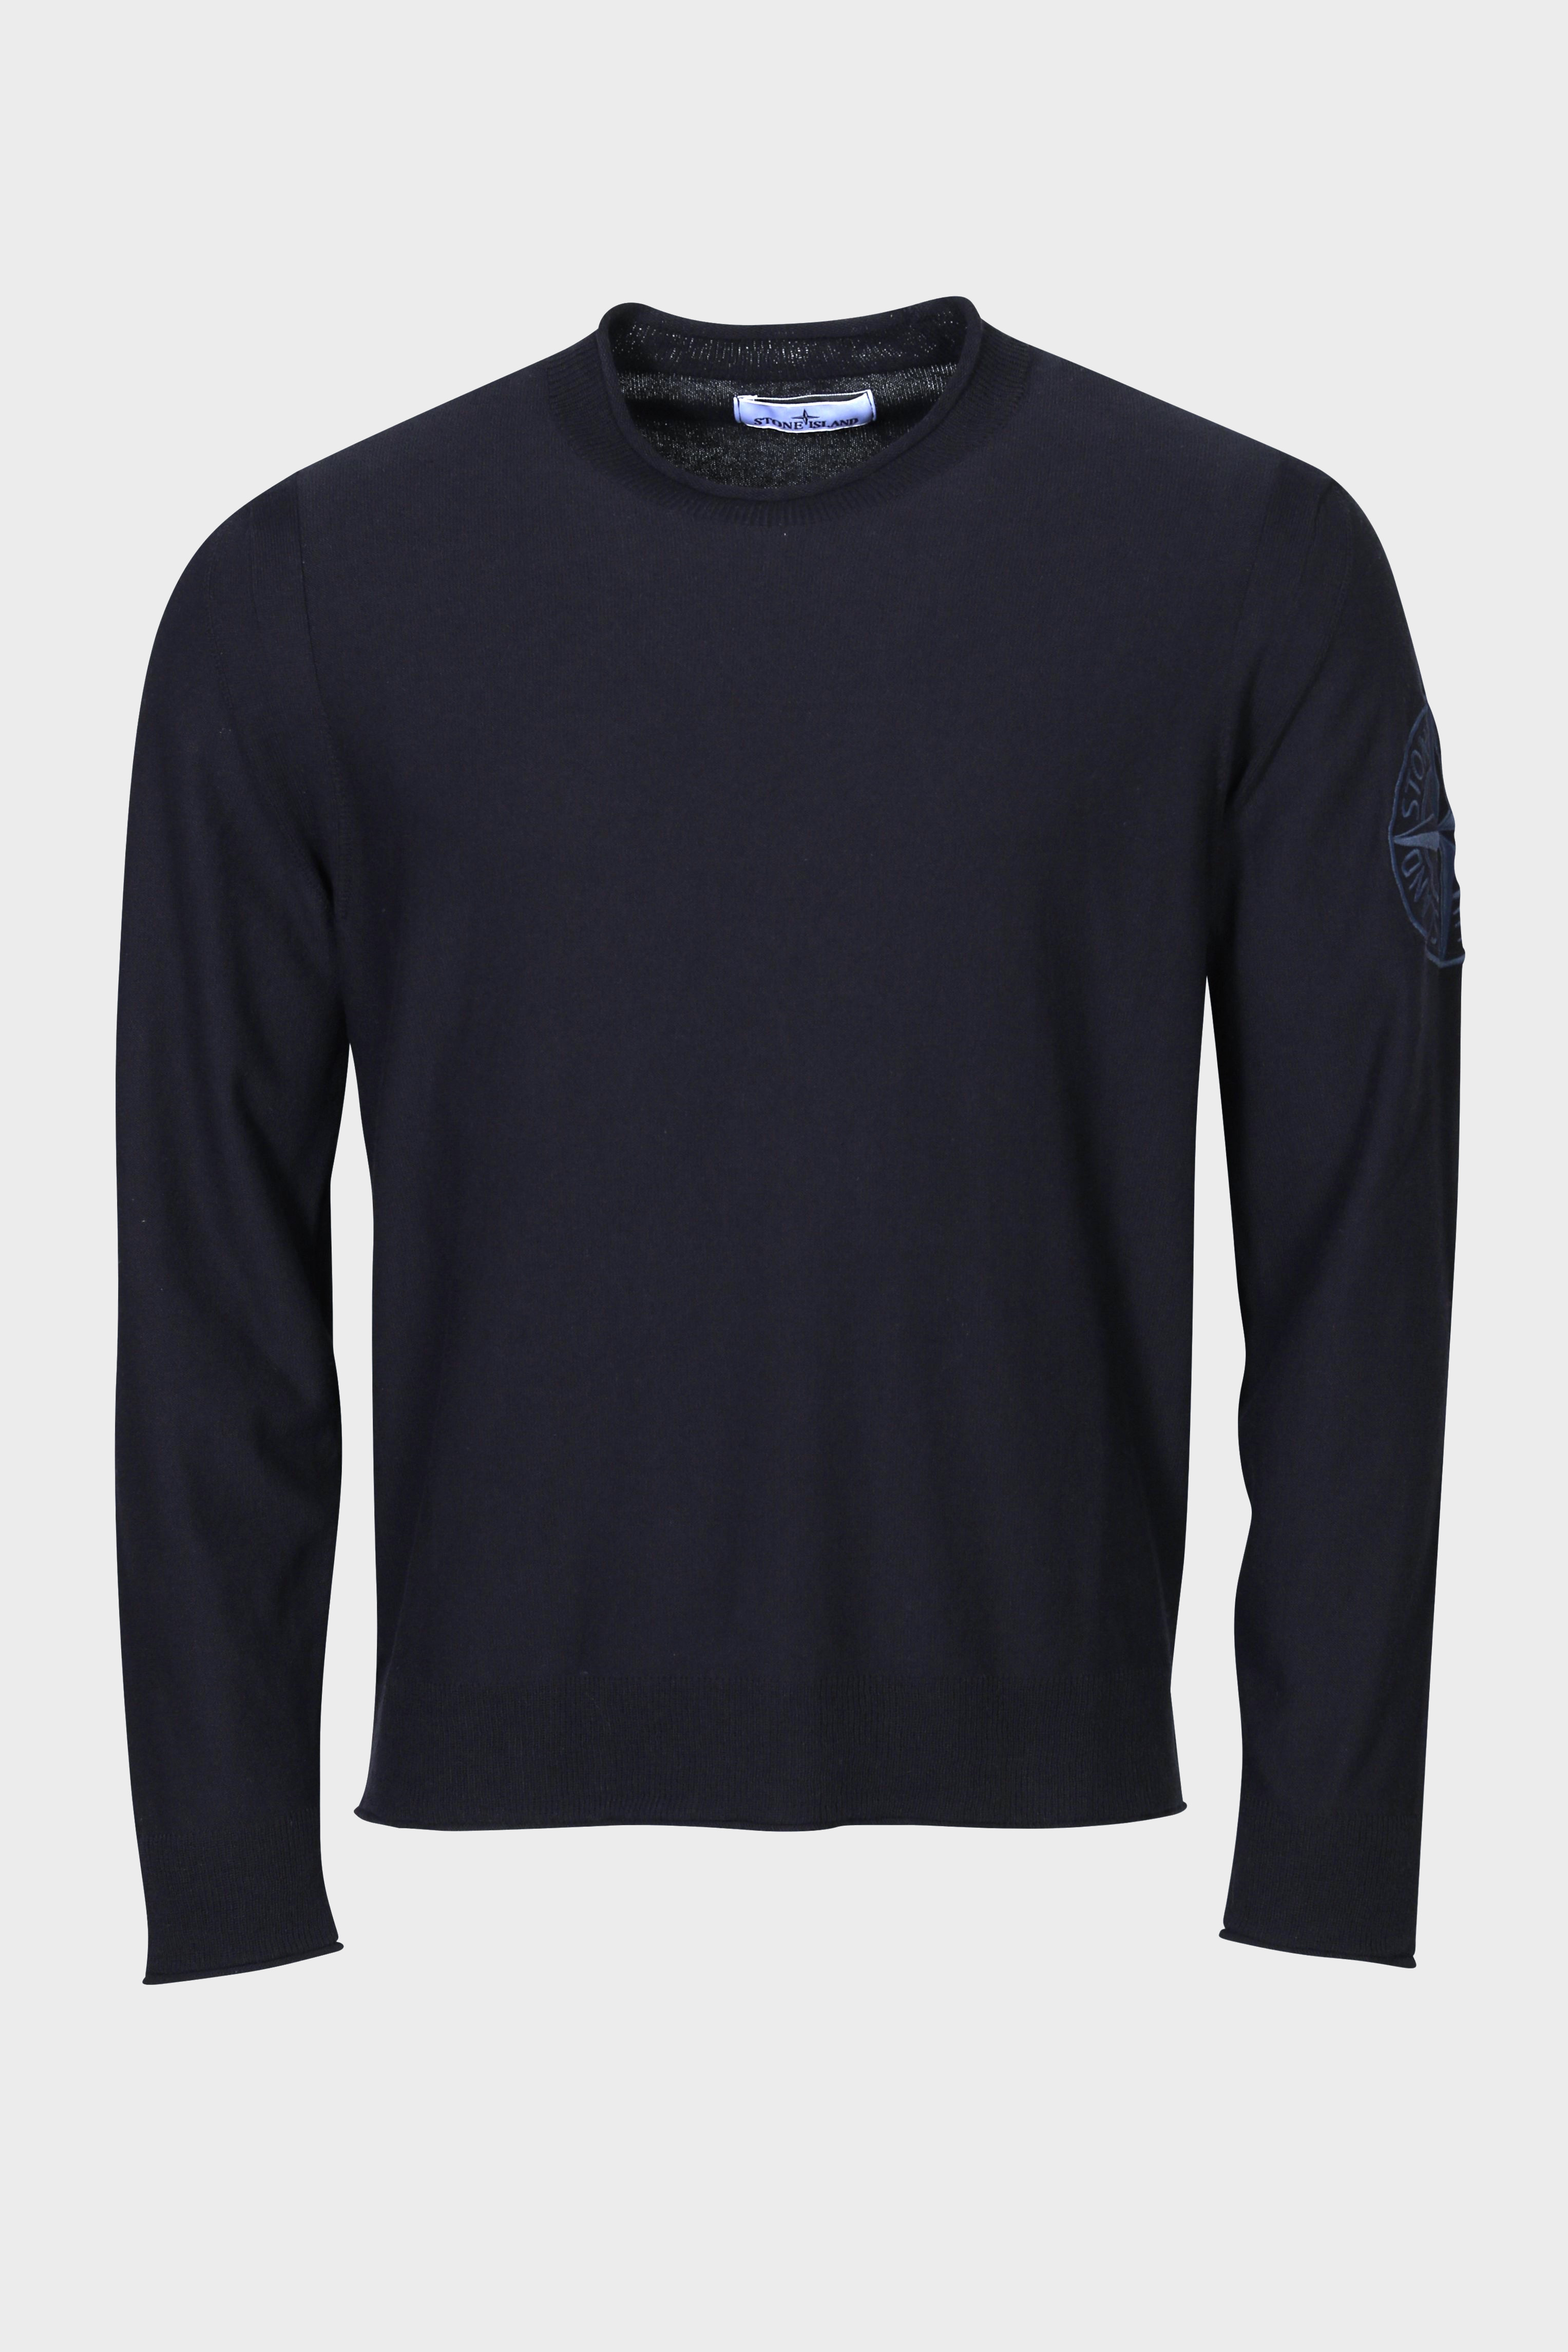 STONE ISLAND Cotton Knit Pullover in Navy